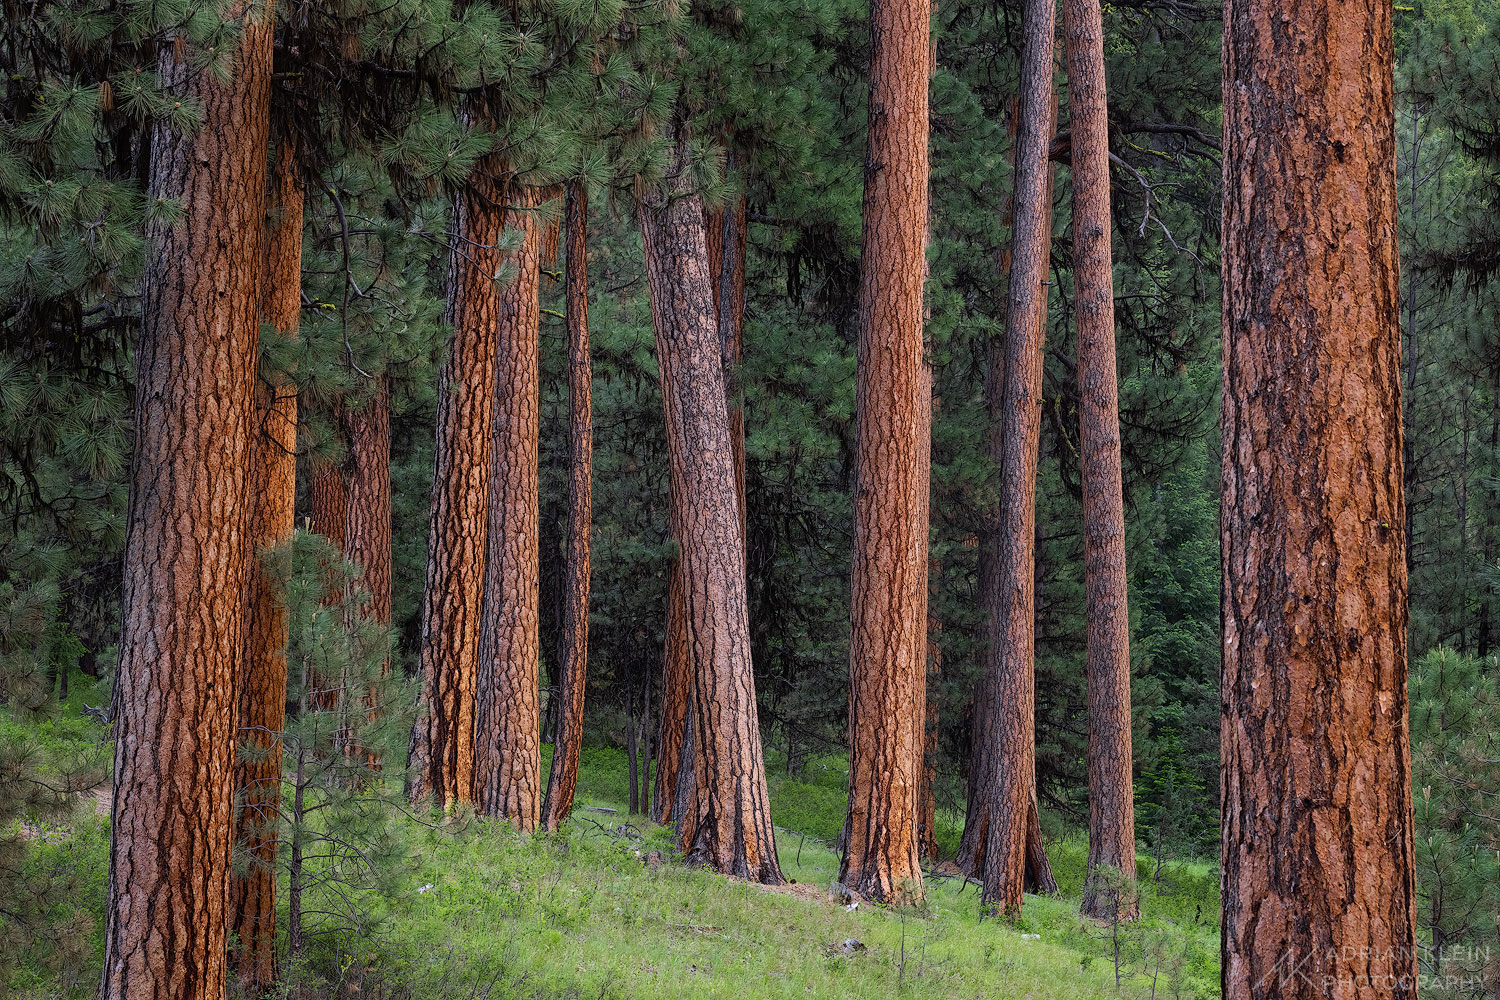 A grove of ponderosa pine trees as the clouds let a splash of light onto the trunks